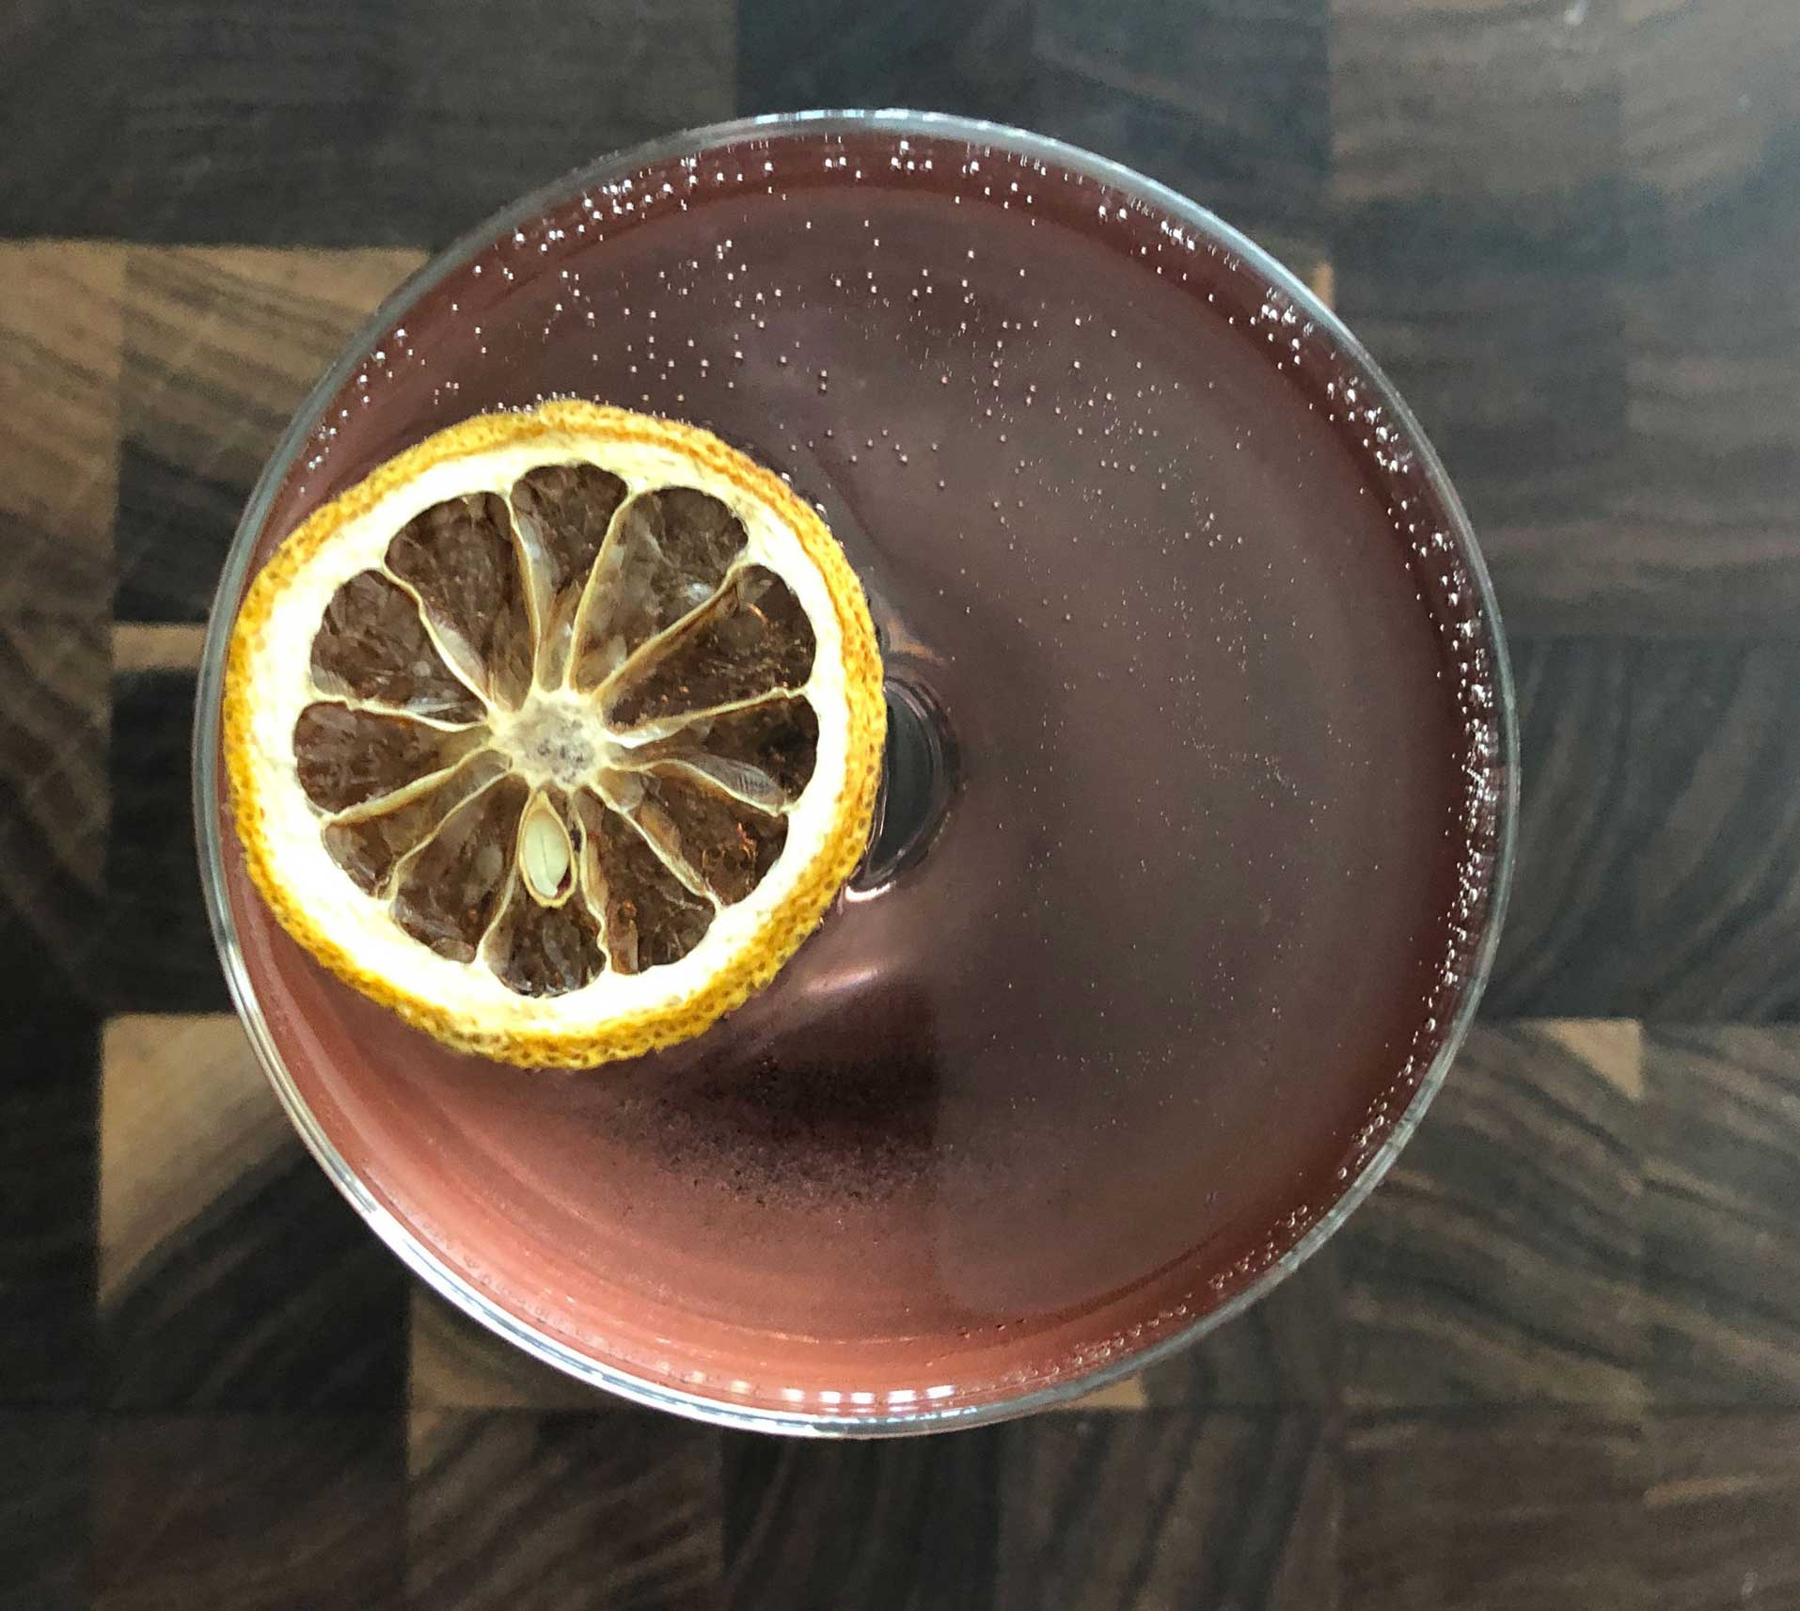 An example of the Prairie Pooch, the mixed drink (drink) featuring Hayman’s London Dry Gin, Cocchi Americano Rosa, Dolin Blanc Vermouth de Chambéry, sparkling wine, Rothman & Winter Crème de Violette, and lemon twist; photo by Lee Edwards